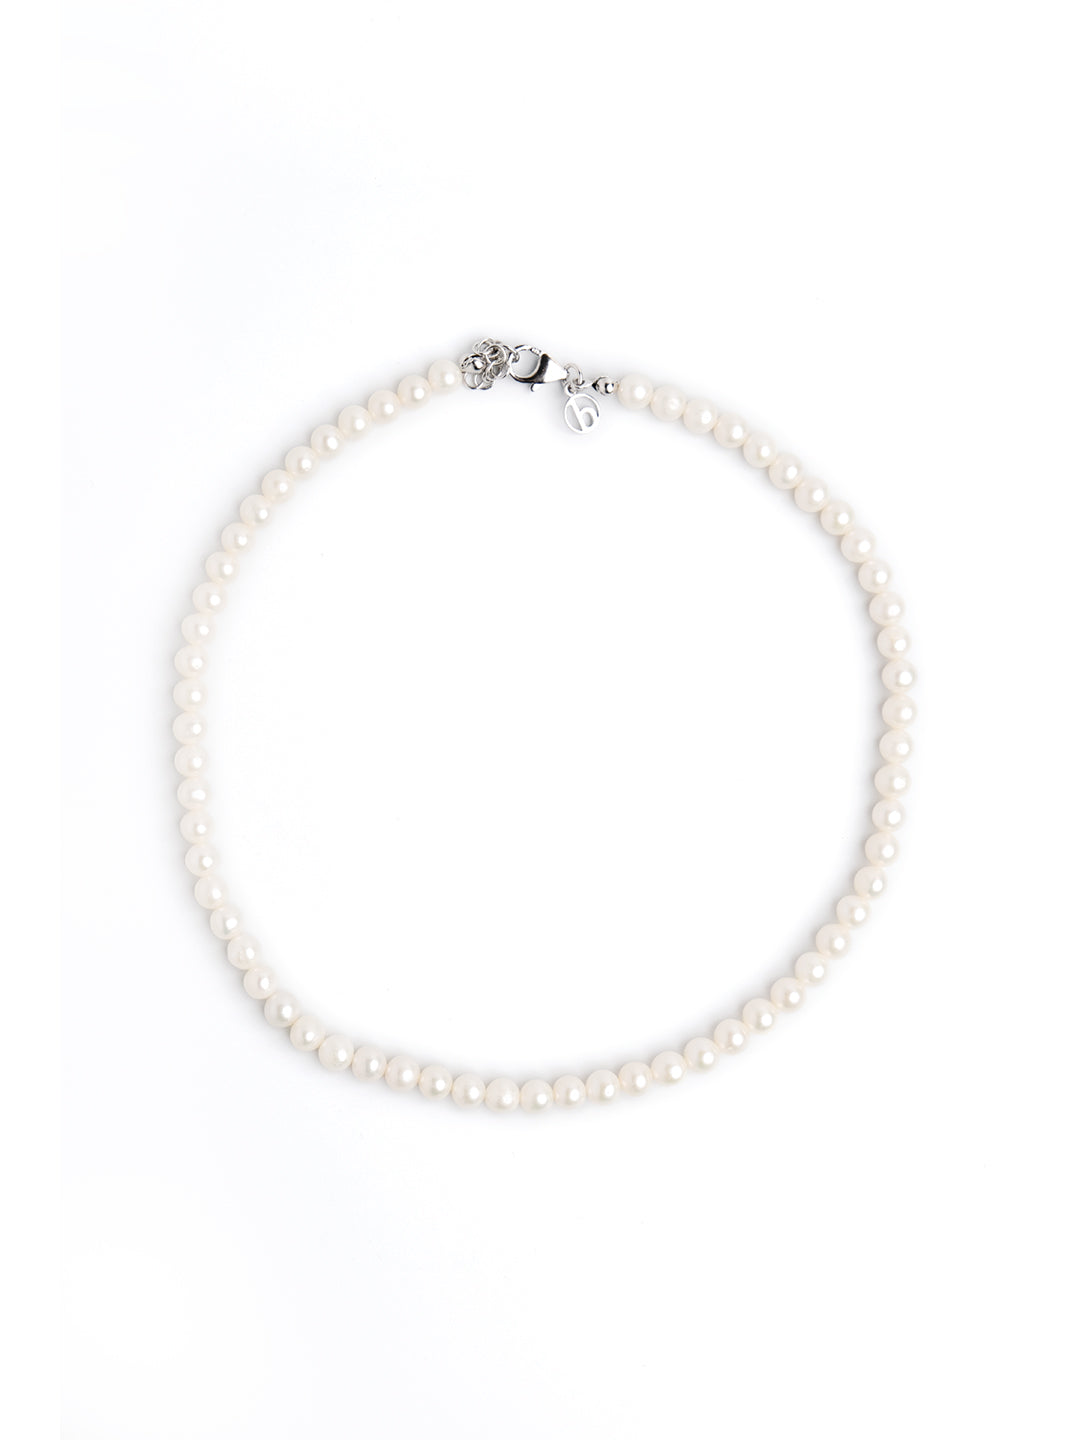 Pearl necklace for men and women | Butter & Co